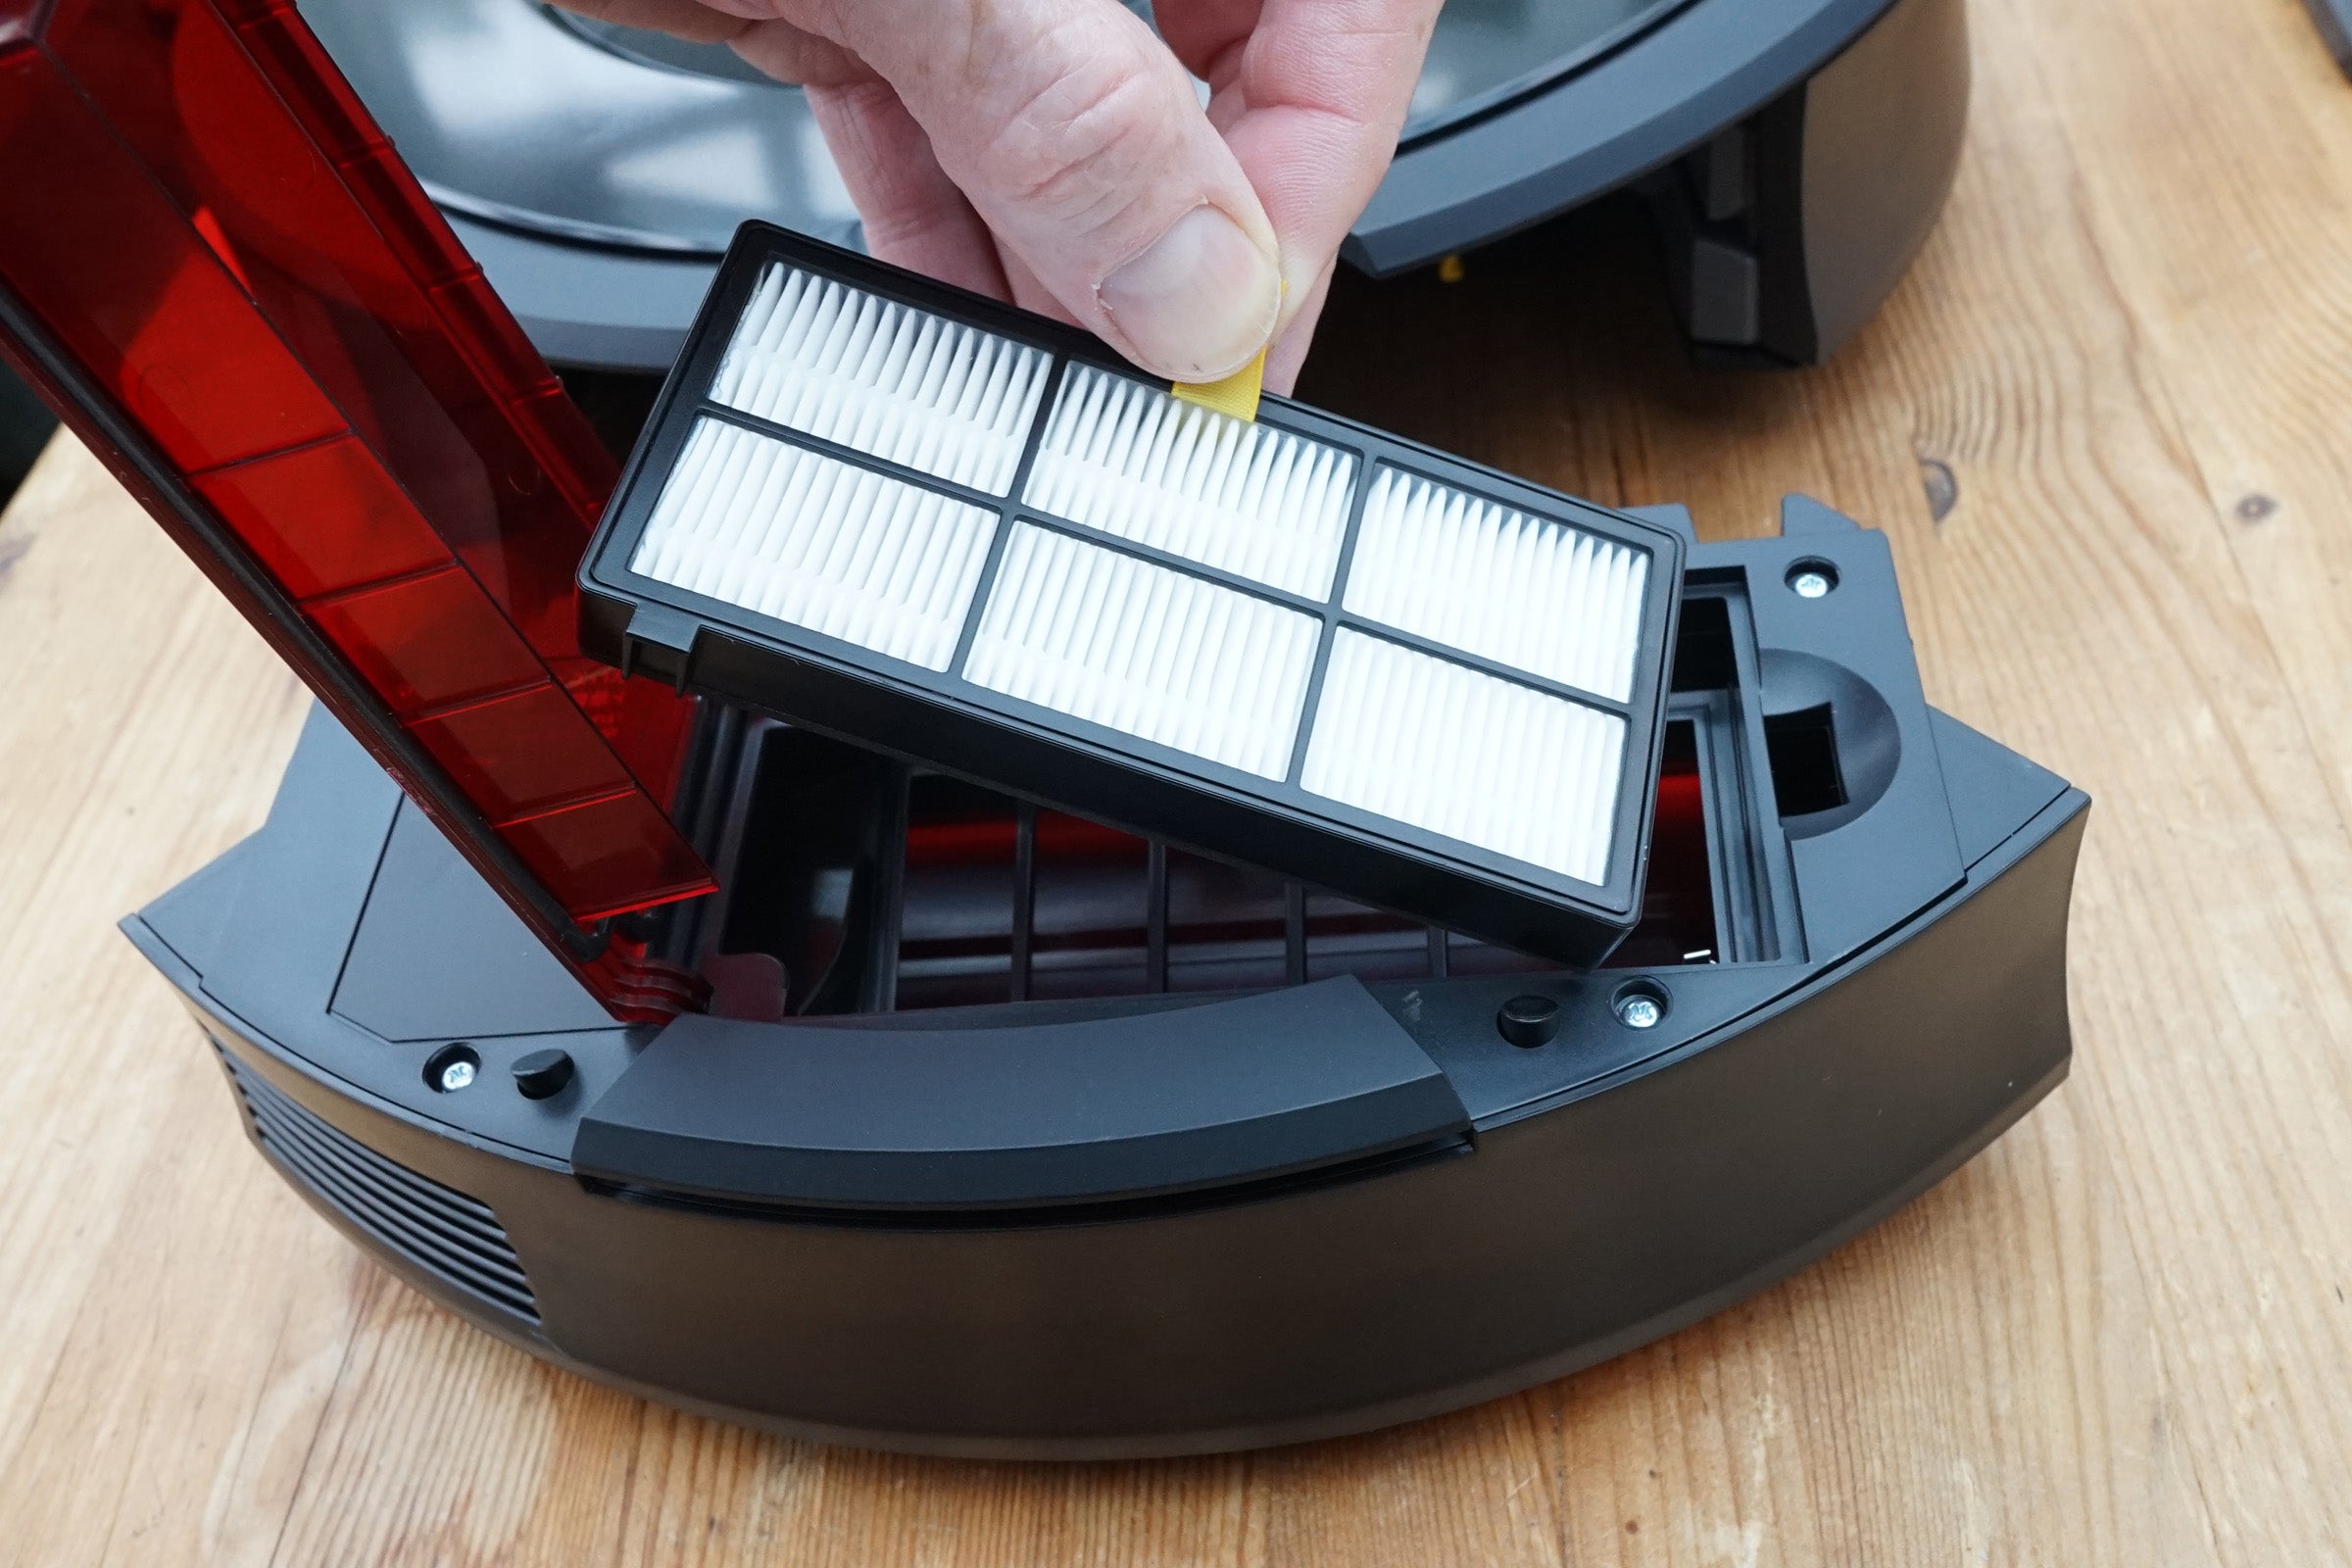 Changing the filter of an iRobot Roomba 875 vacuum.